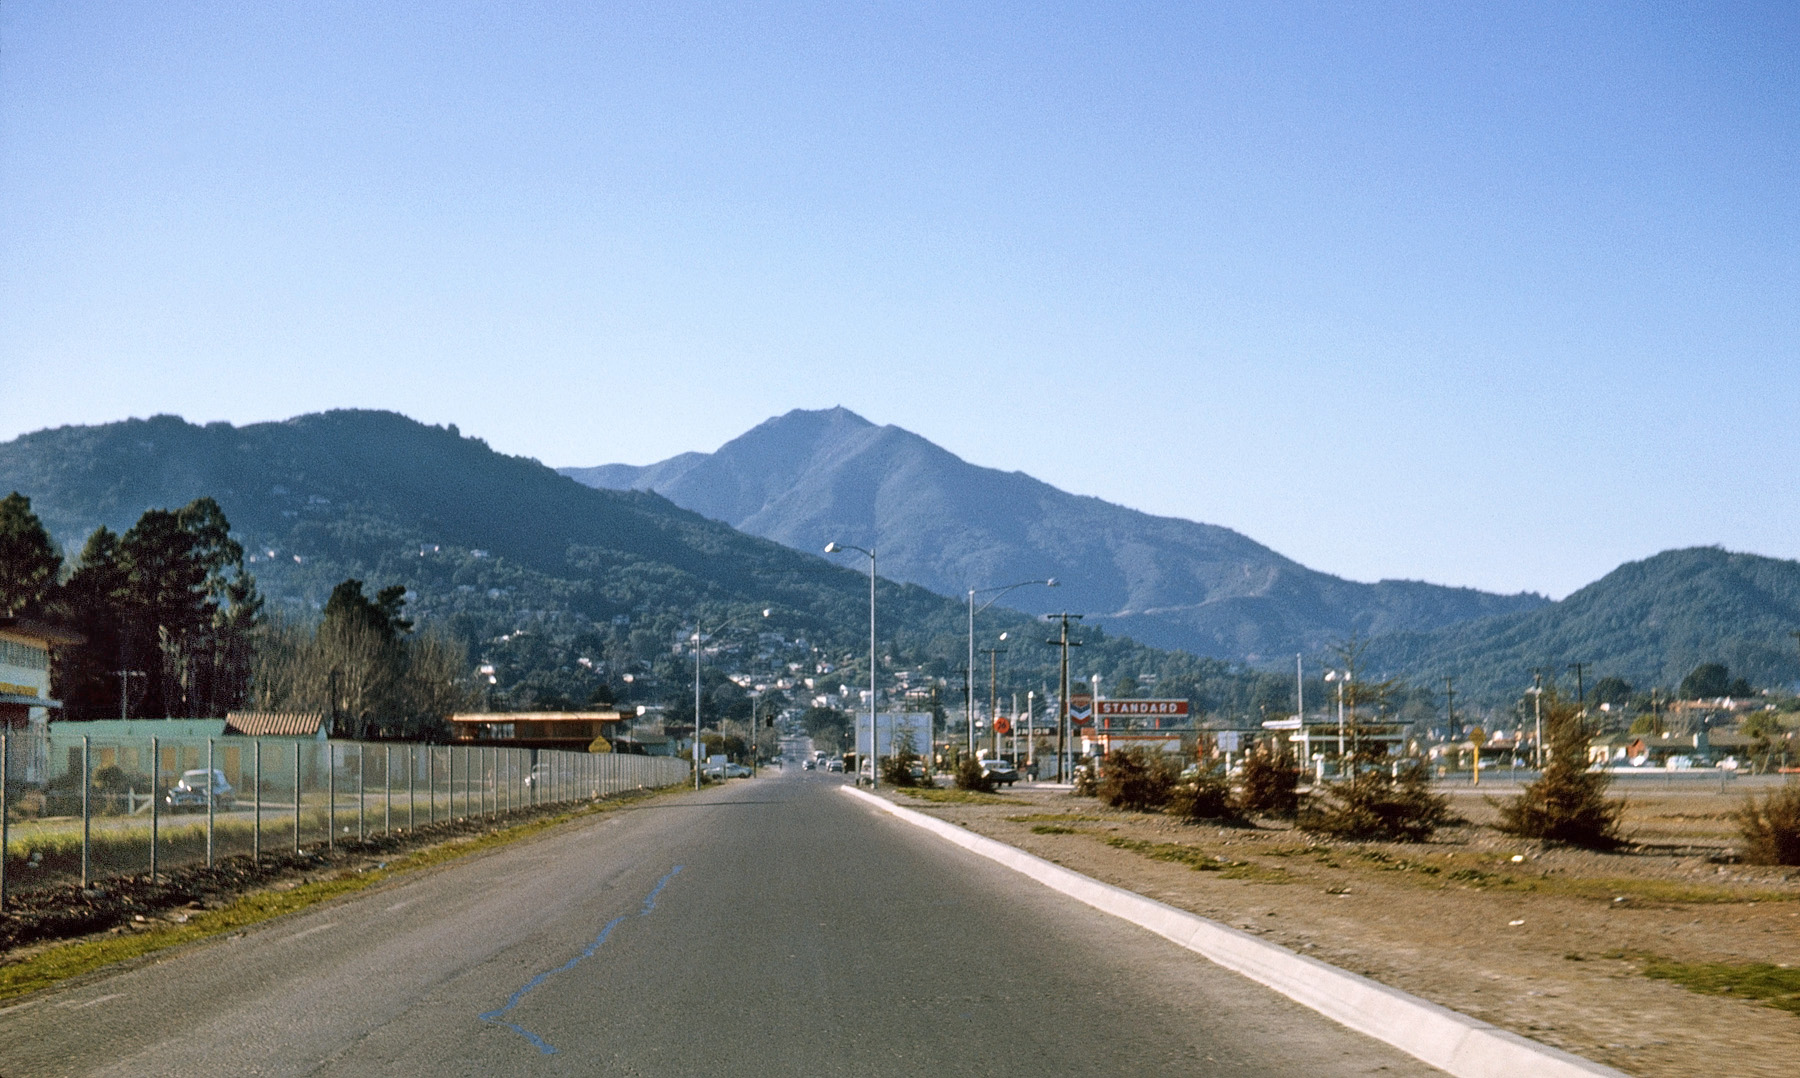 The southbound on-ramp to U.S. 101 in Corte Madera, California, in a Kodachrome slide I shot through the back window of our 1956 Rambler station wagon in January 1963. Corte Madera is the "twin city" of my home town, Idyllic™ Larkspur. Rising up in the distance is Marin County's iconic symbol, Mount Tamalpais. Closer and to the left, Corte Madera's "Christmas Tree Hill" is so-named from the practice, in days of yore, of homeowners banding together to illuminate their houses to produce an outline of a Christmas tree when viewed from the distance. To the right, Larkspur's Little and Big King Mountains. Yes, we call hills "mountains" in Marin County. Fortunately, they're protected from development by open-space regulations, and Mt. Tam by state park and Marin Municipal Water District ownership. View full size.